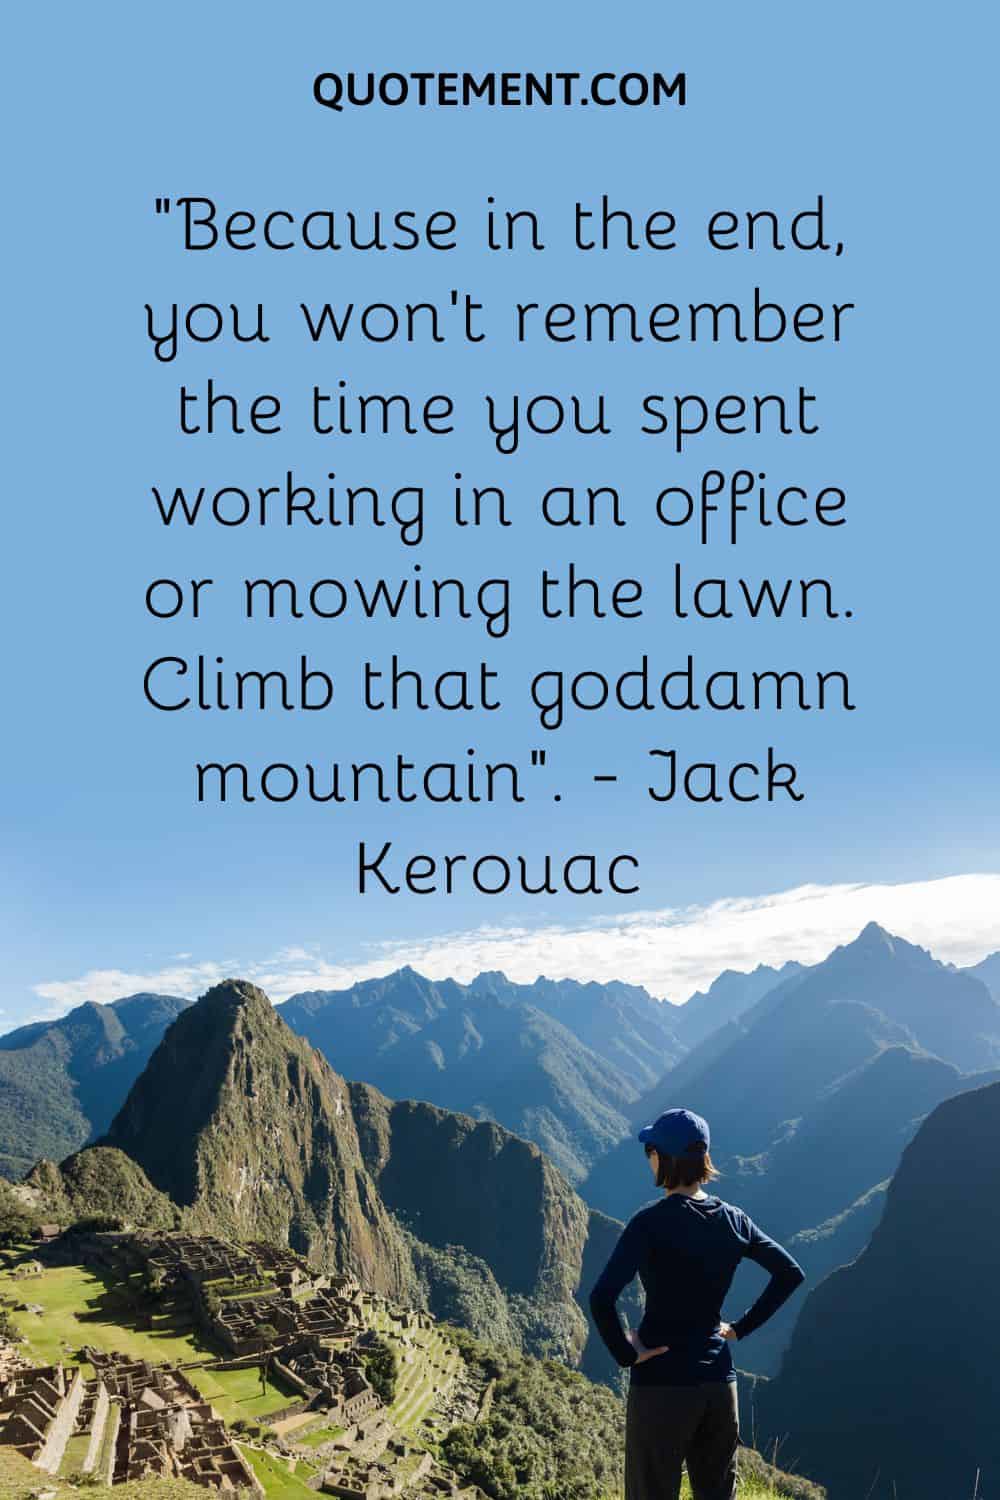 “Because in the end, you won’t remember the time you spent working in an office or mowing the lawn. Climb that goddamn mountain”. — Jack Kerouac